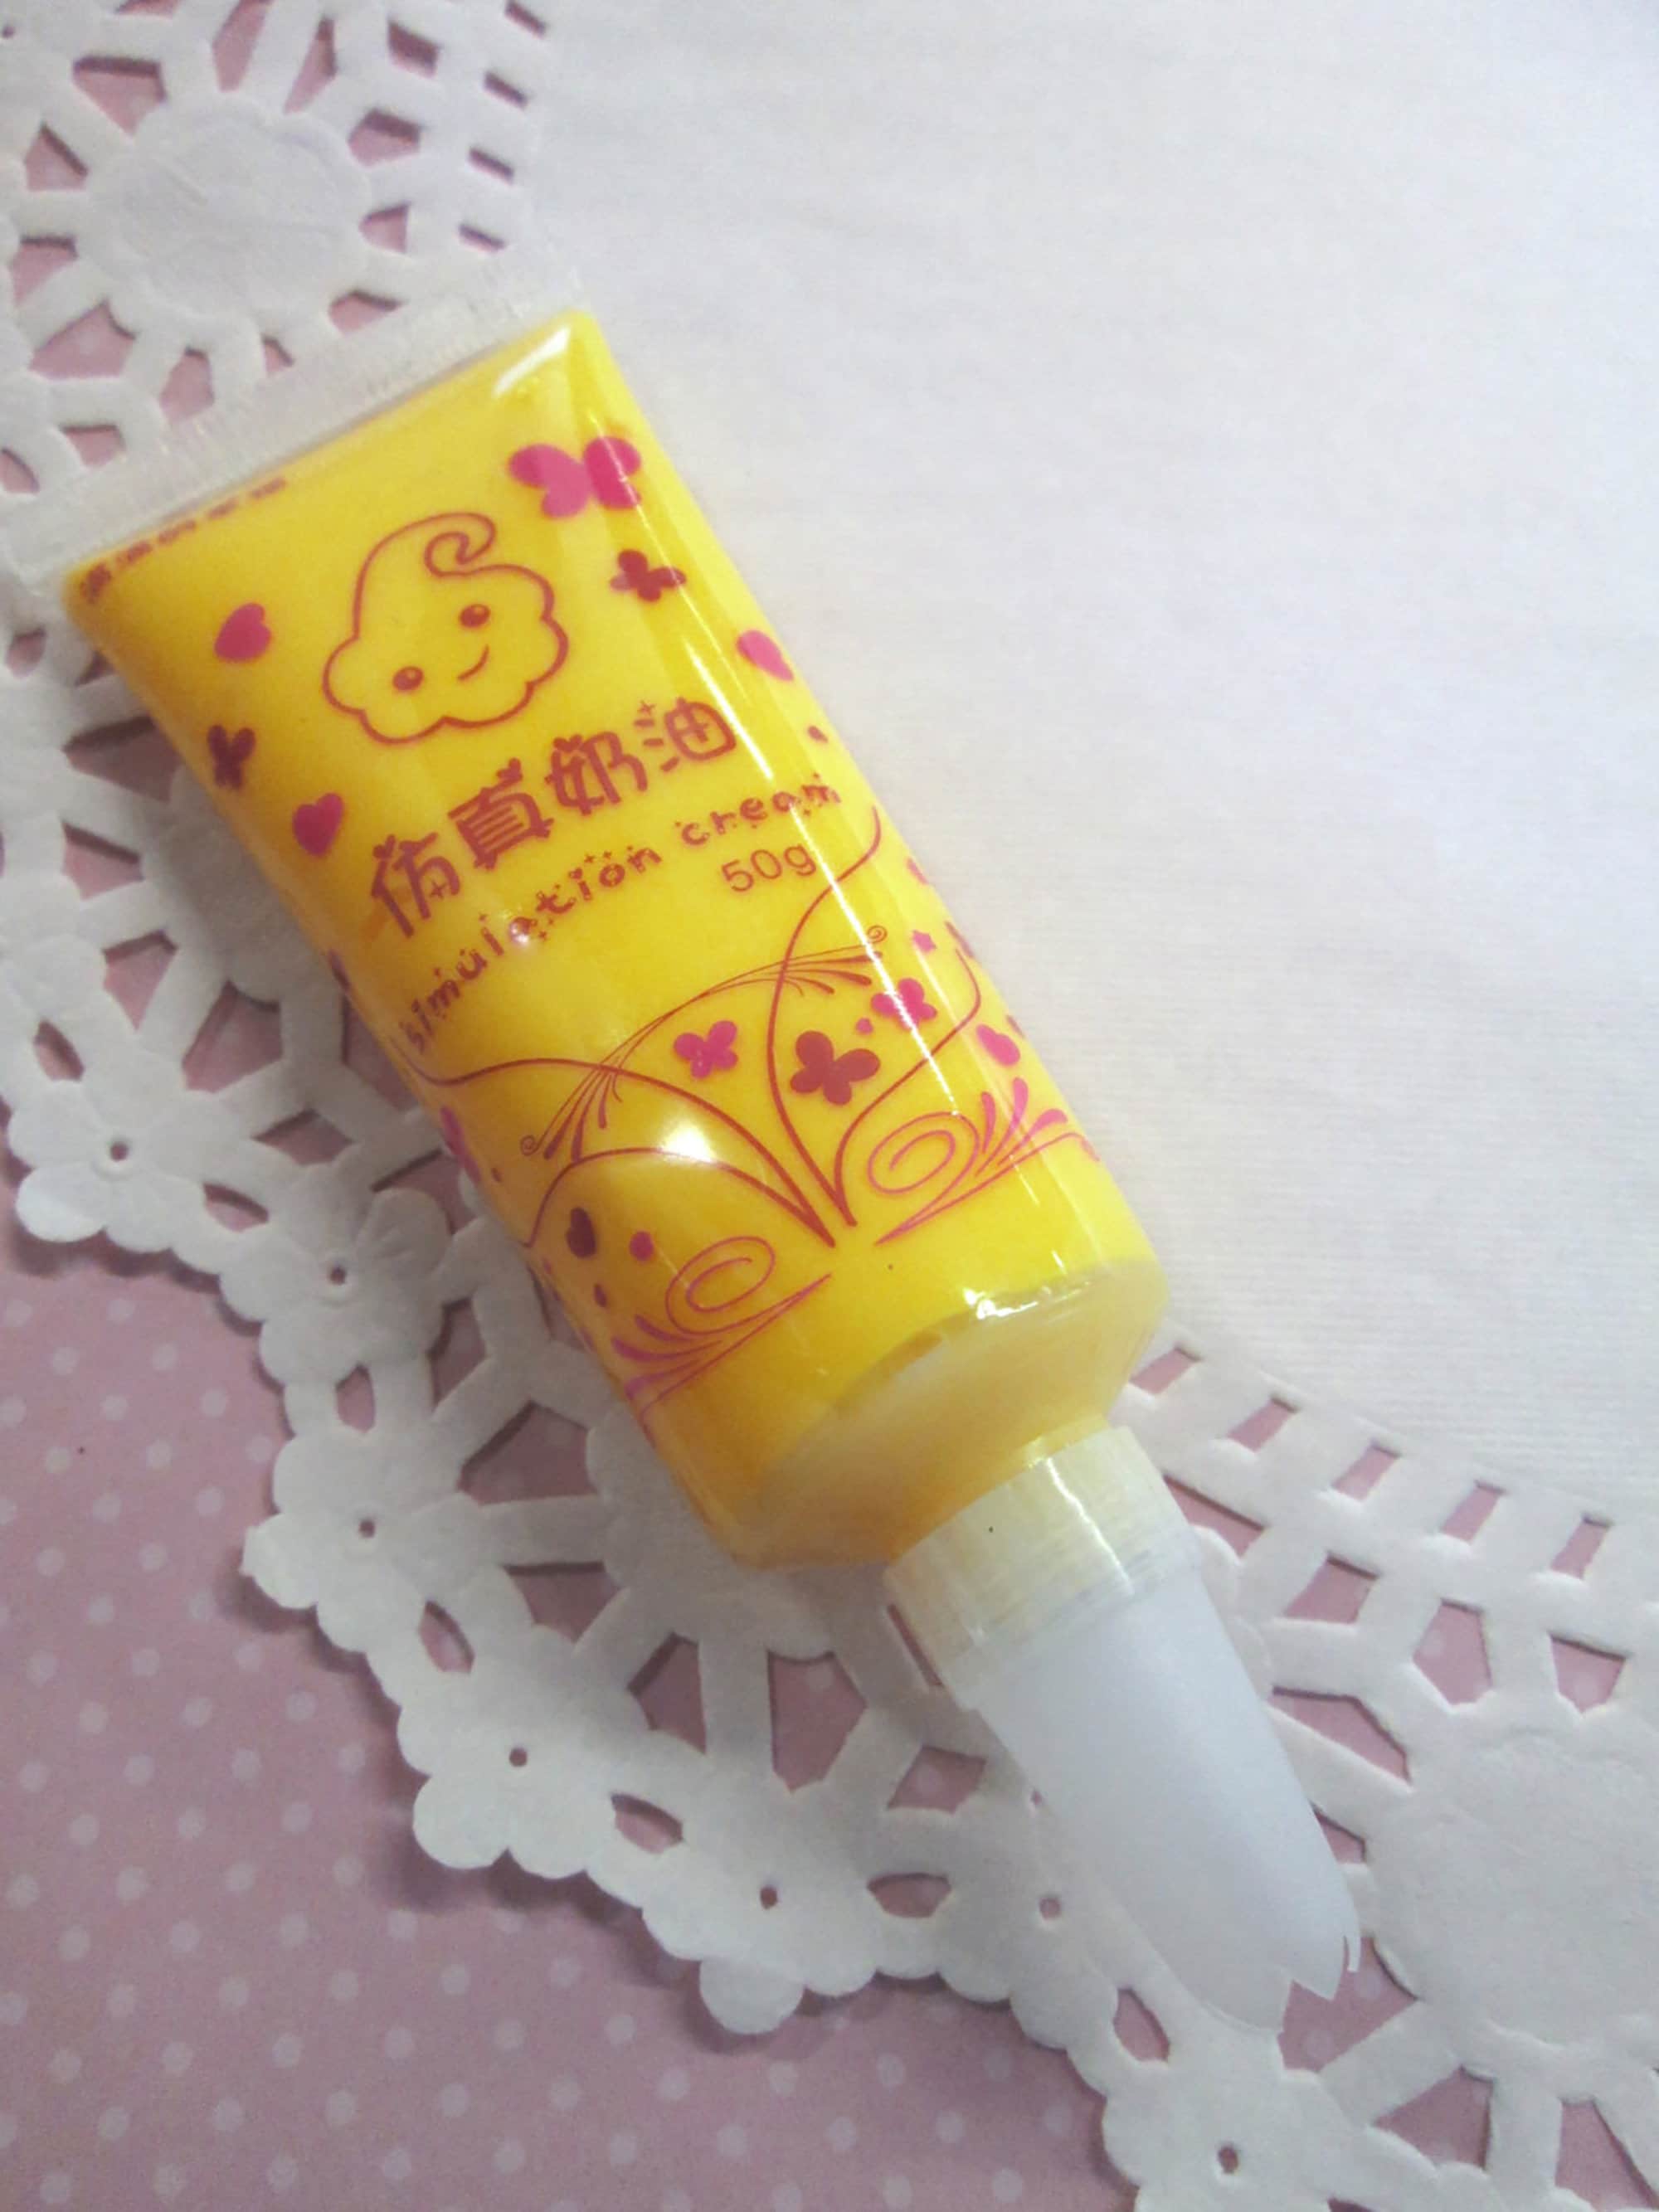 Decoden Whipped Cream Glue, Orange Yellow Color, for Cell Phone